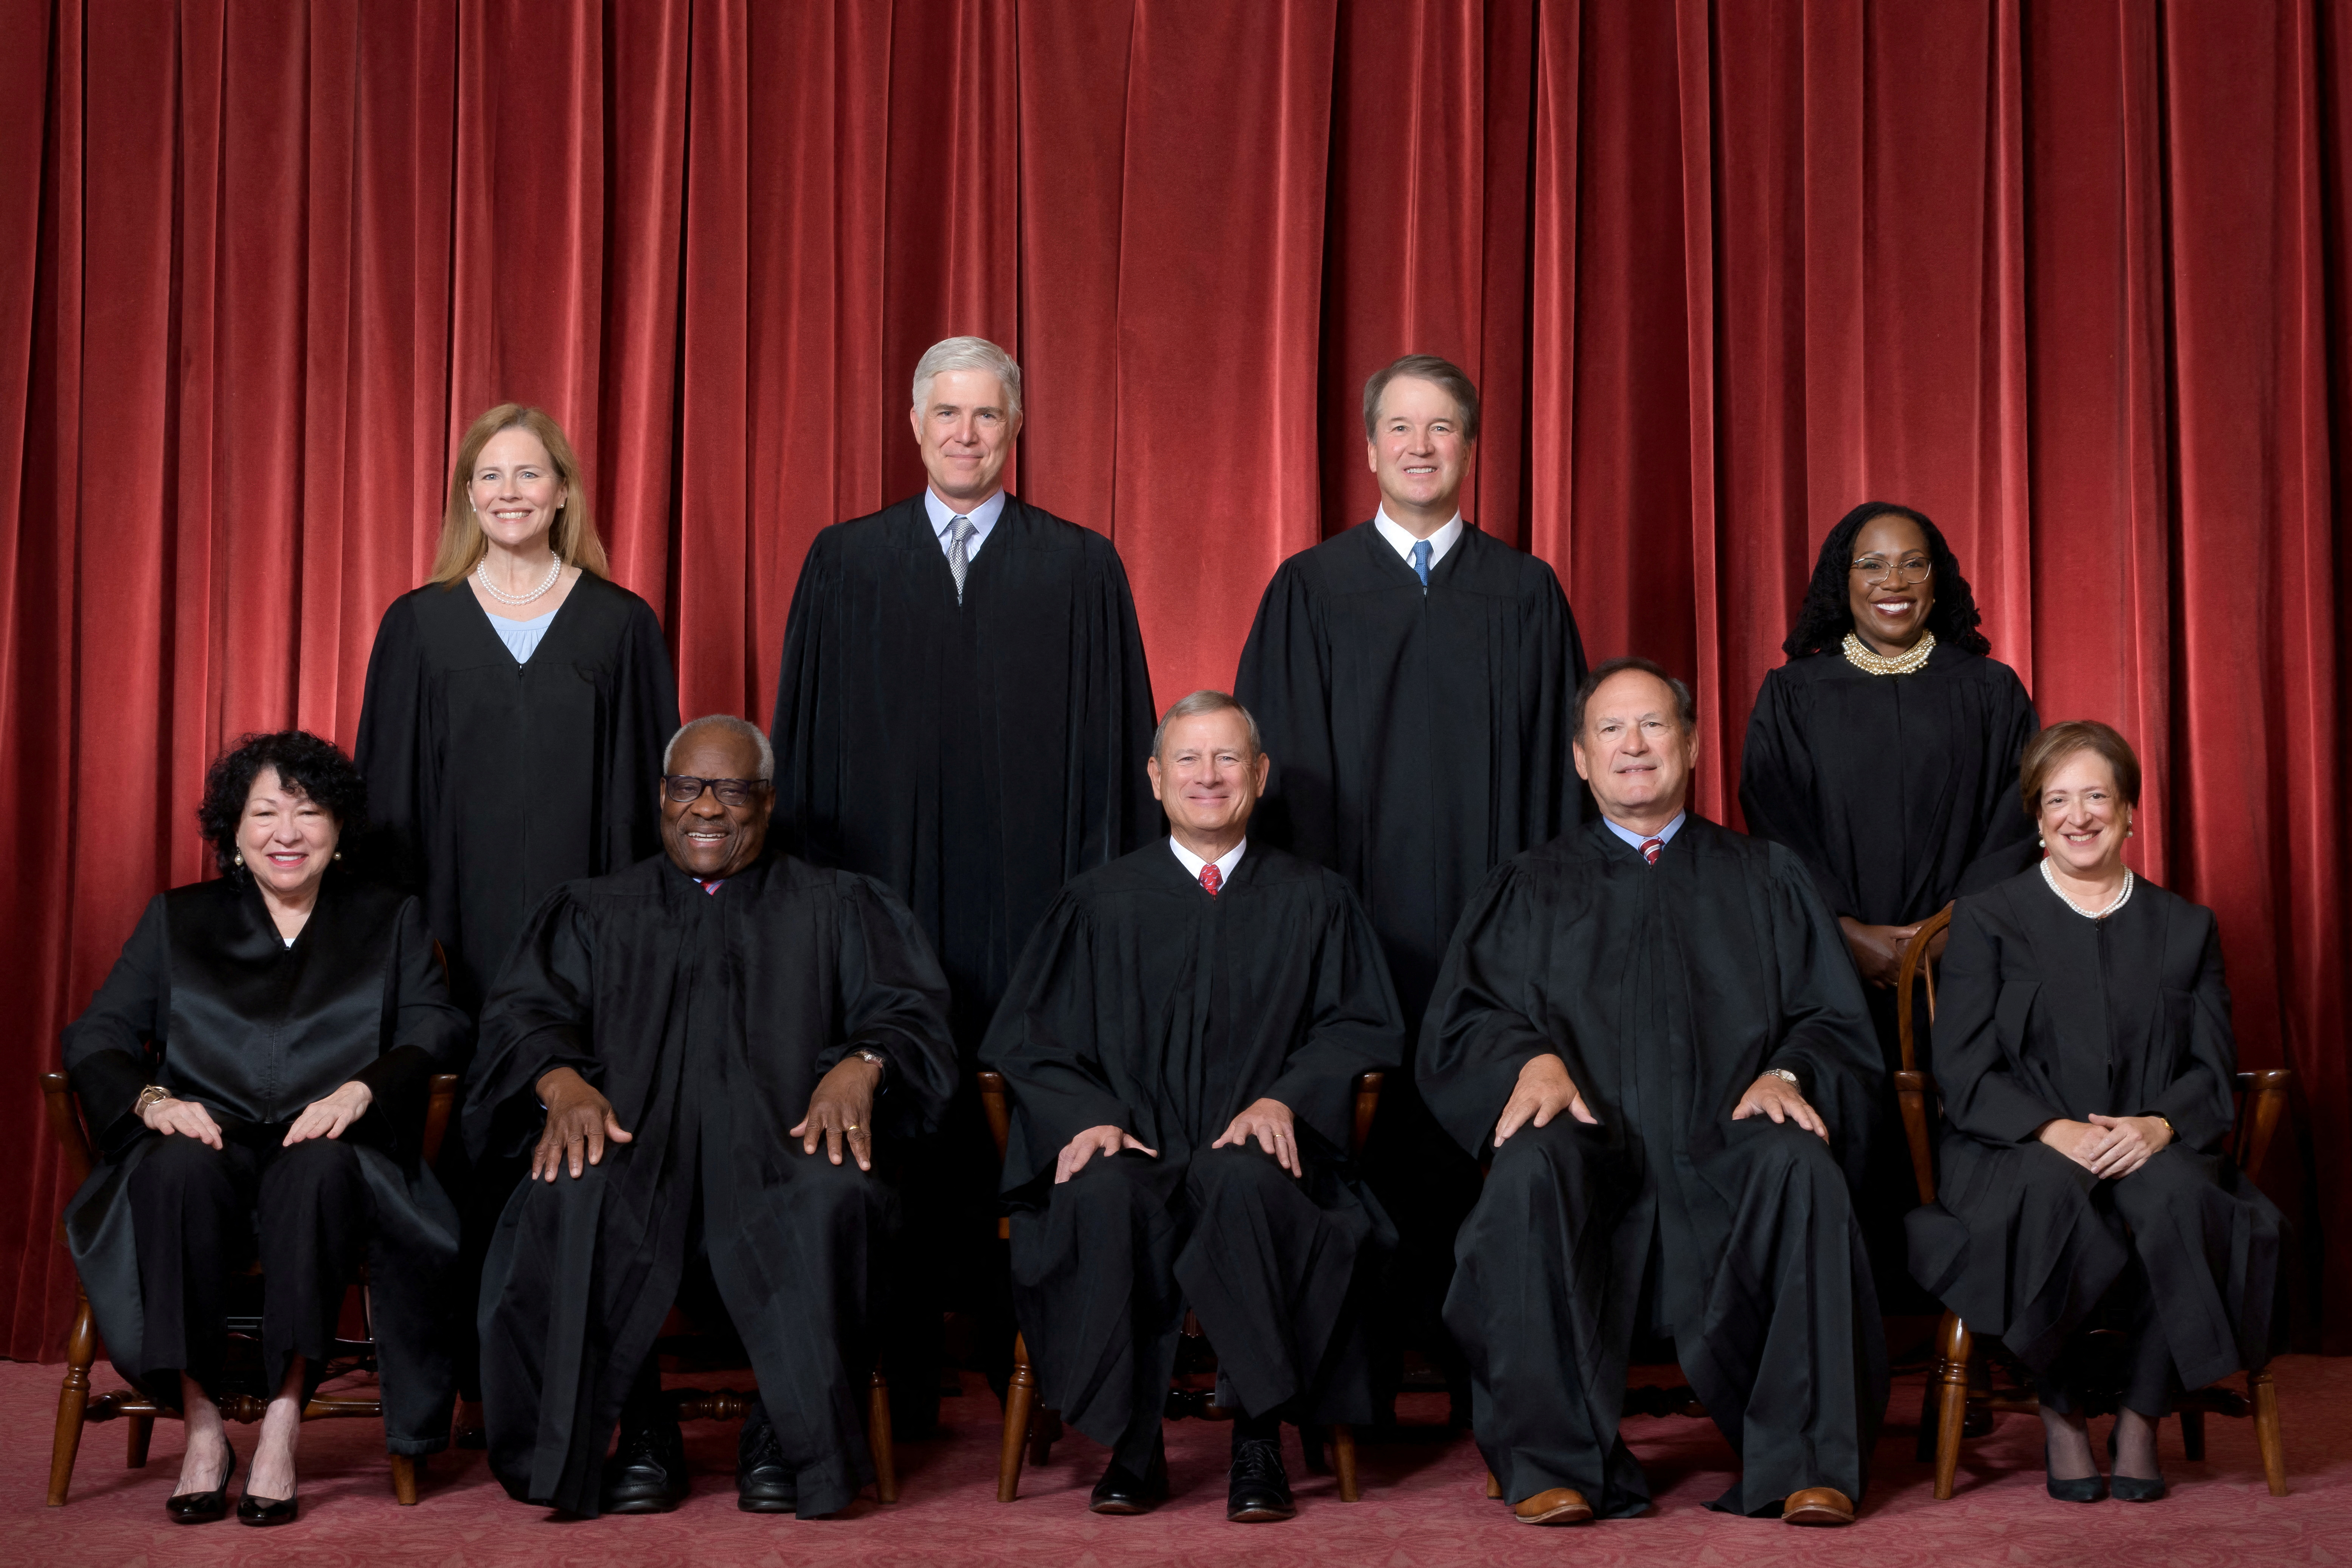 The current U.S. Supreme Court is seen in an official handout photograph released by the Court in Washington